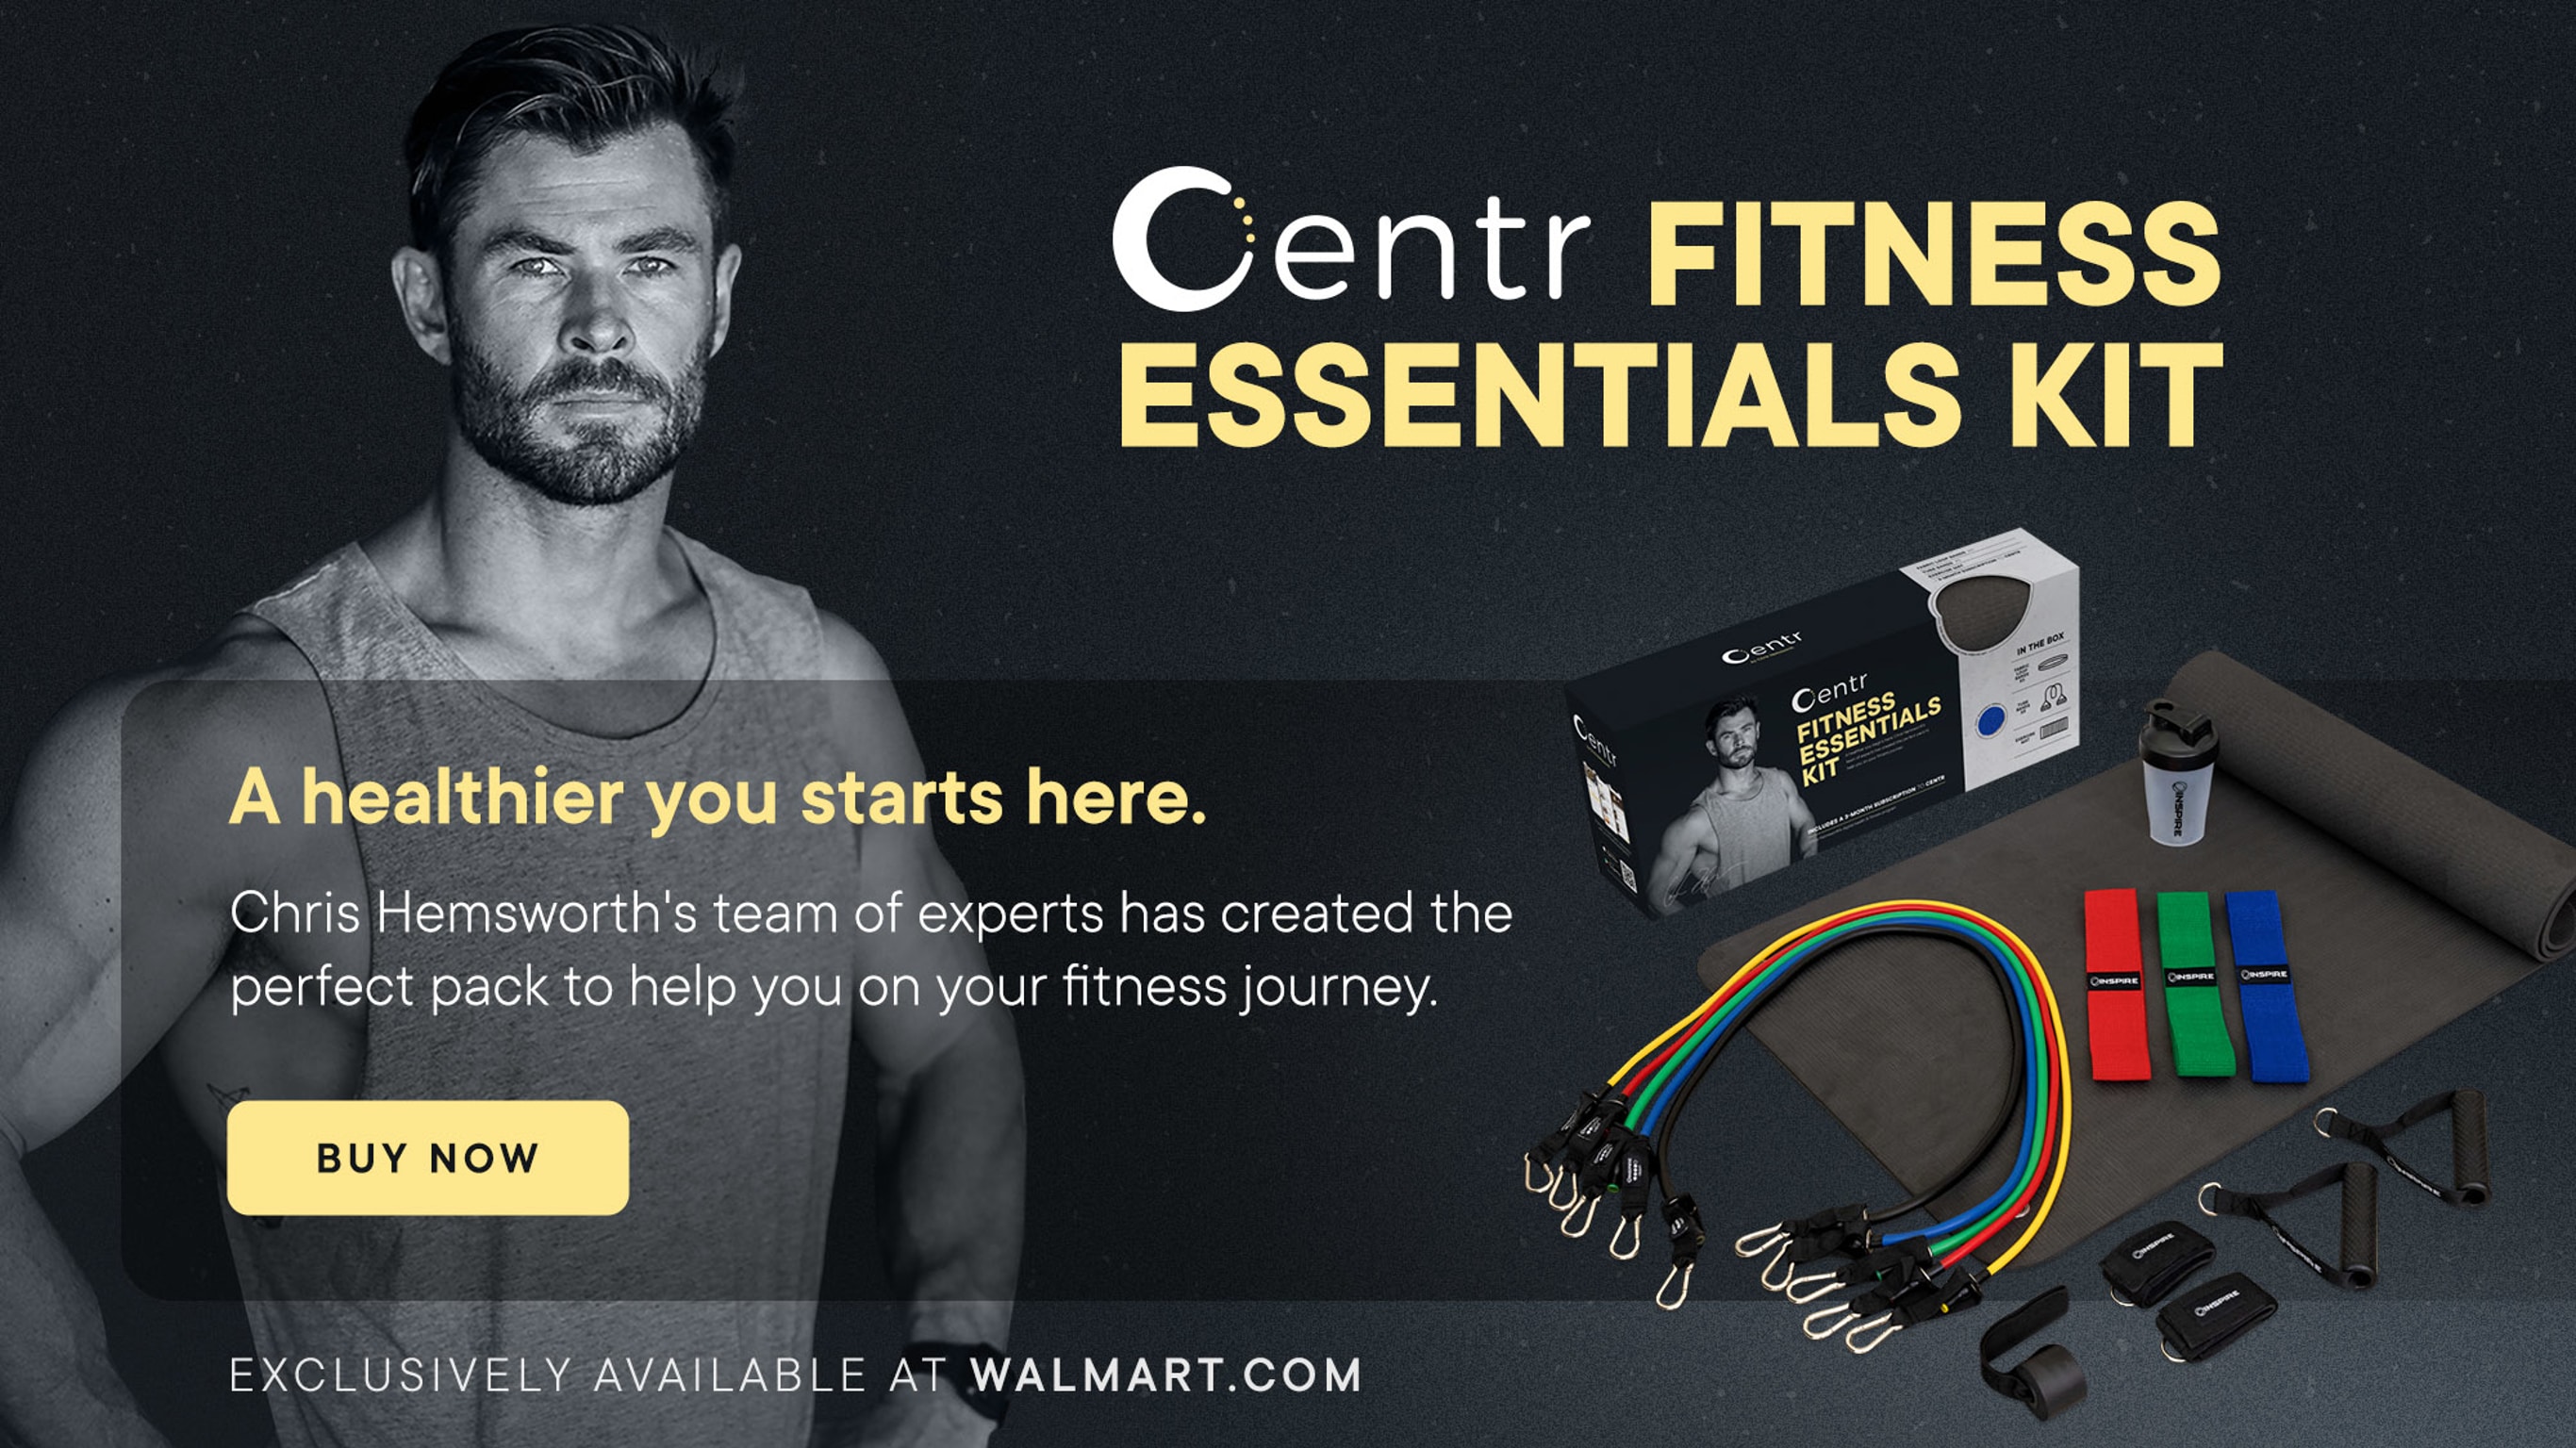 Start right with Centr Begin & the Centr Fitness Essentials Kit